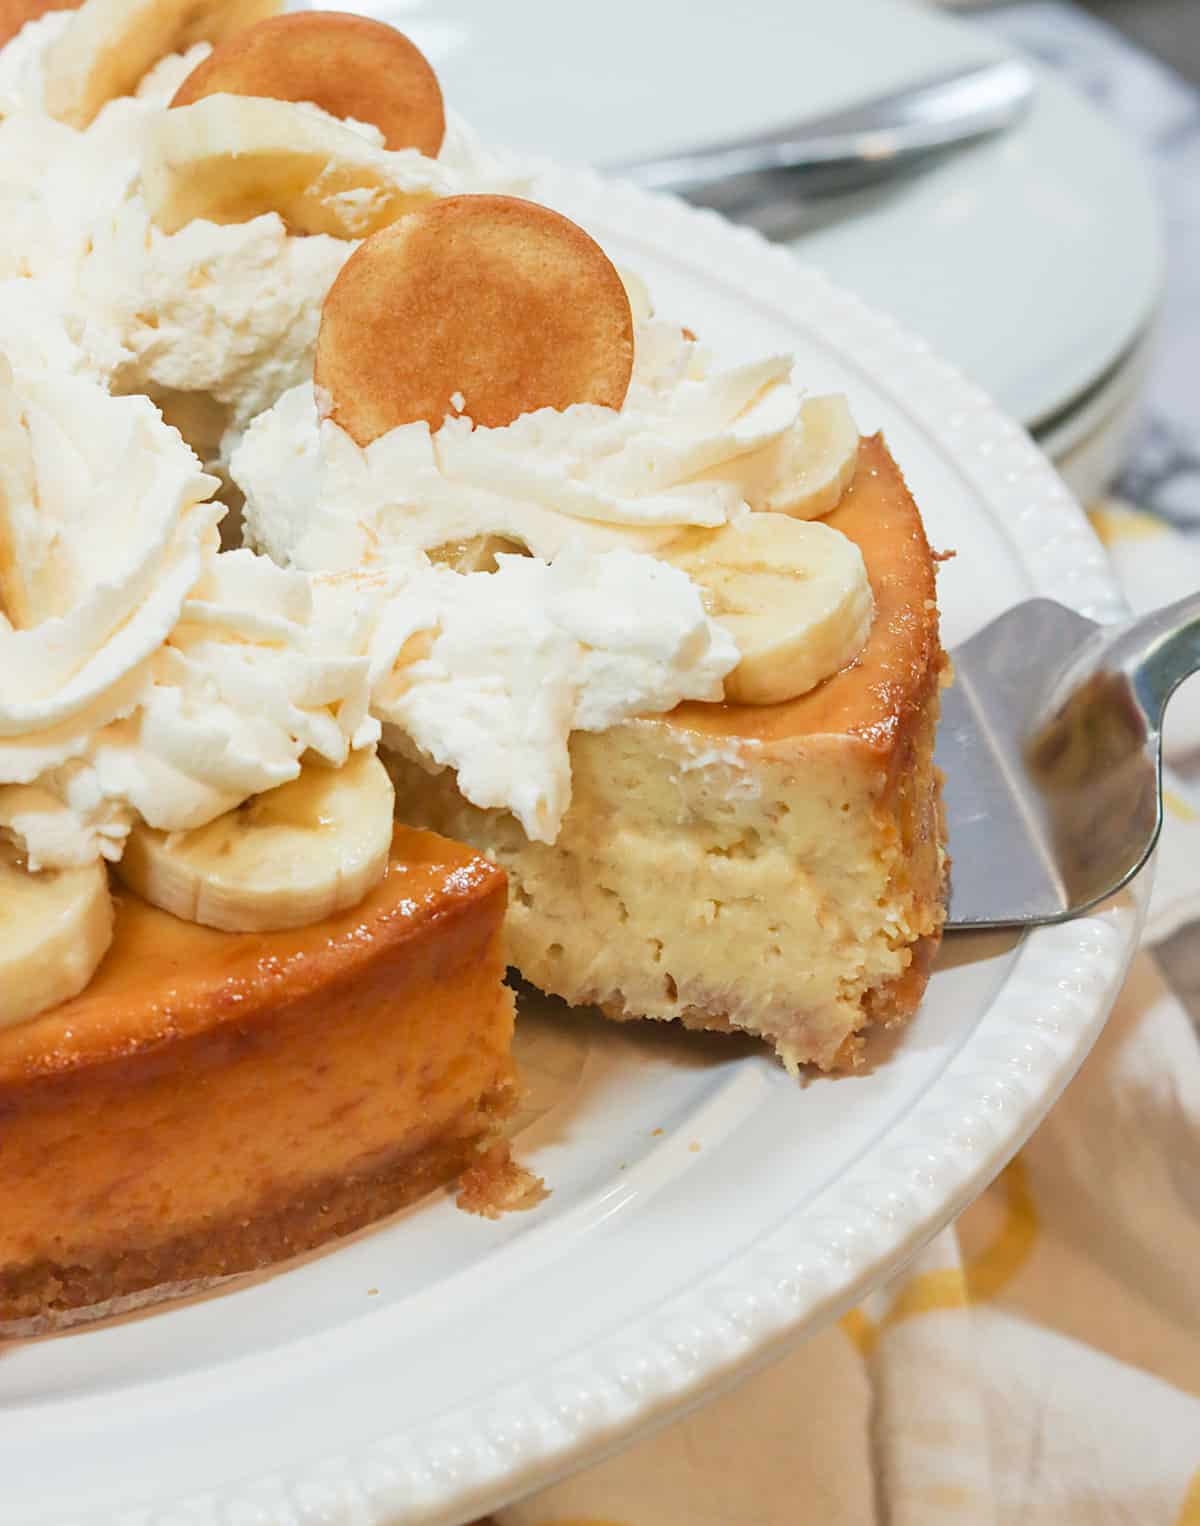 Serving up a slice of insanely good banana pudding cheesecake